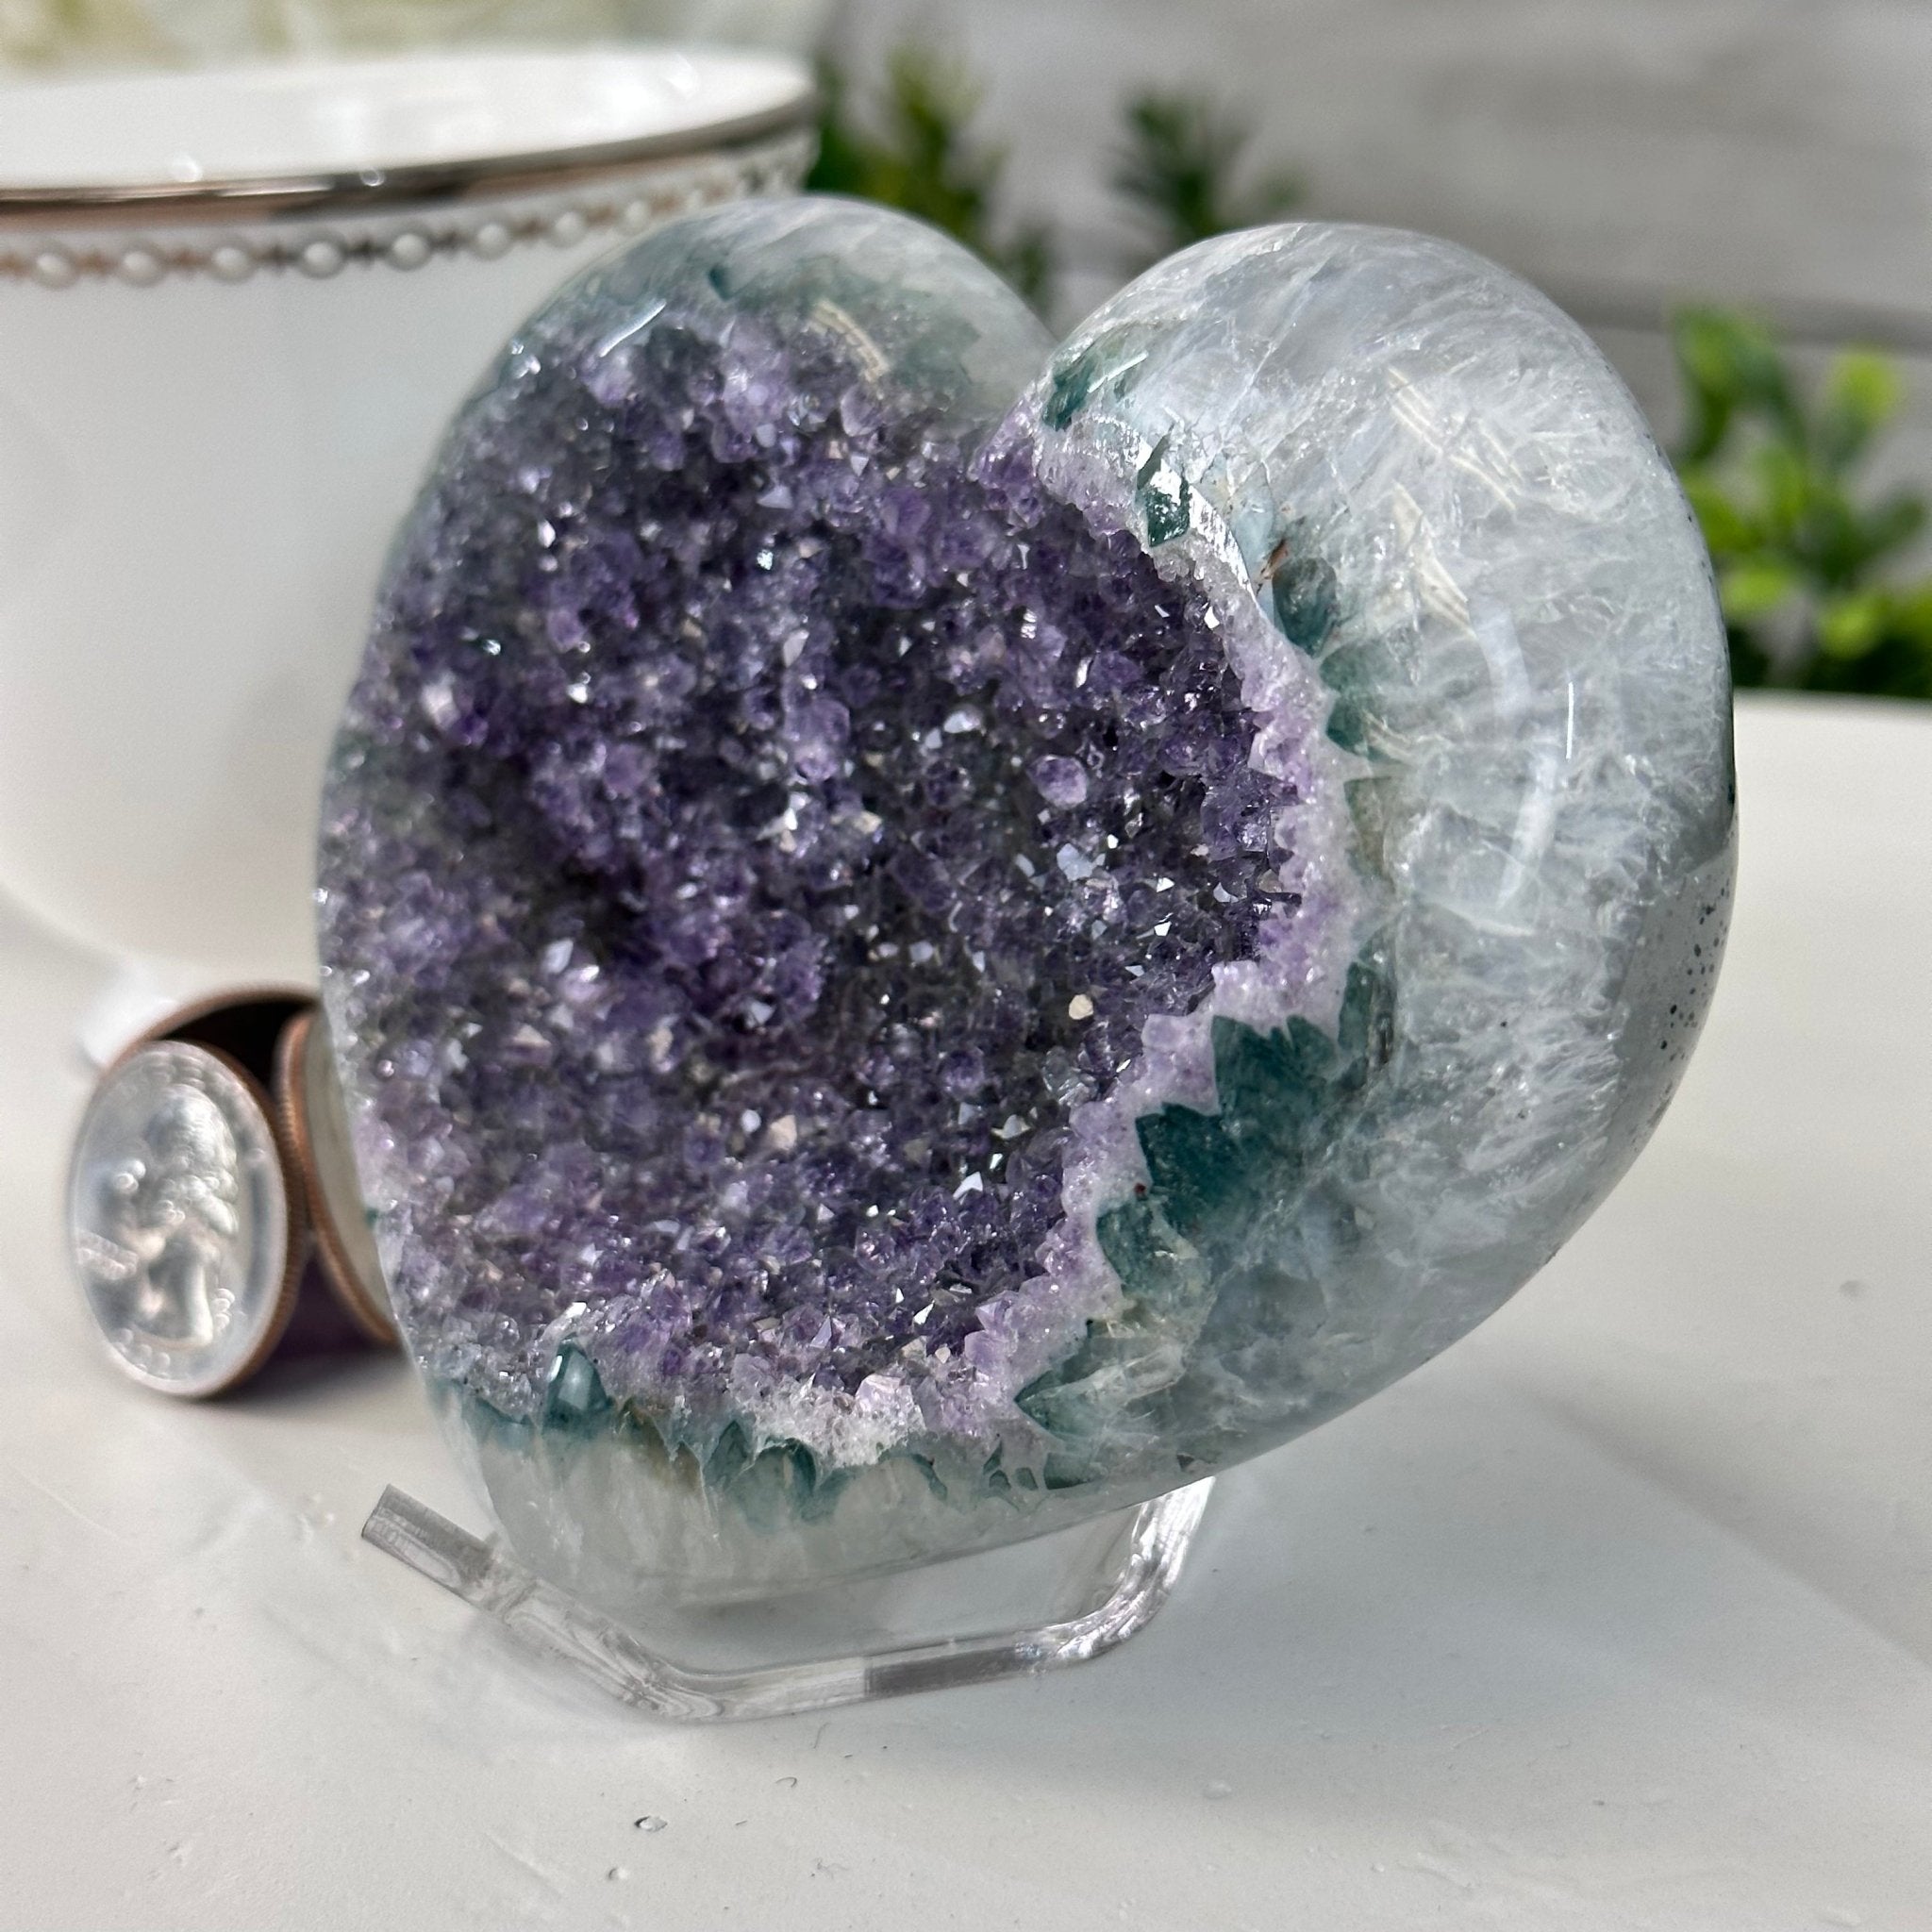 Extra Quality Amethyst Heart Geode on an Acrylic Stand, 0.75 lbs & 3" Tall #5462-0046 by Brazil Gems - Brazil GemsBrazil GemsExtra Quality Amethyst Heart Geode on an Acrylic Stand, 0.75 lbs & 3" Tall #5462-0046 by Brazil GemsHearts5462-0046